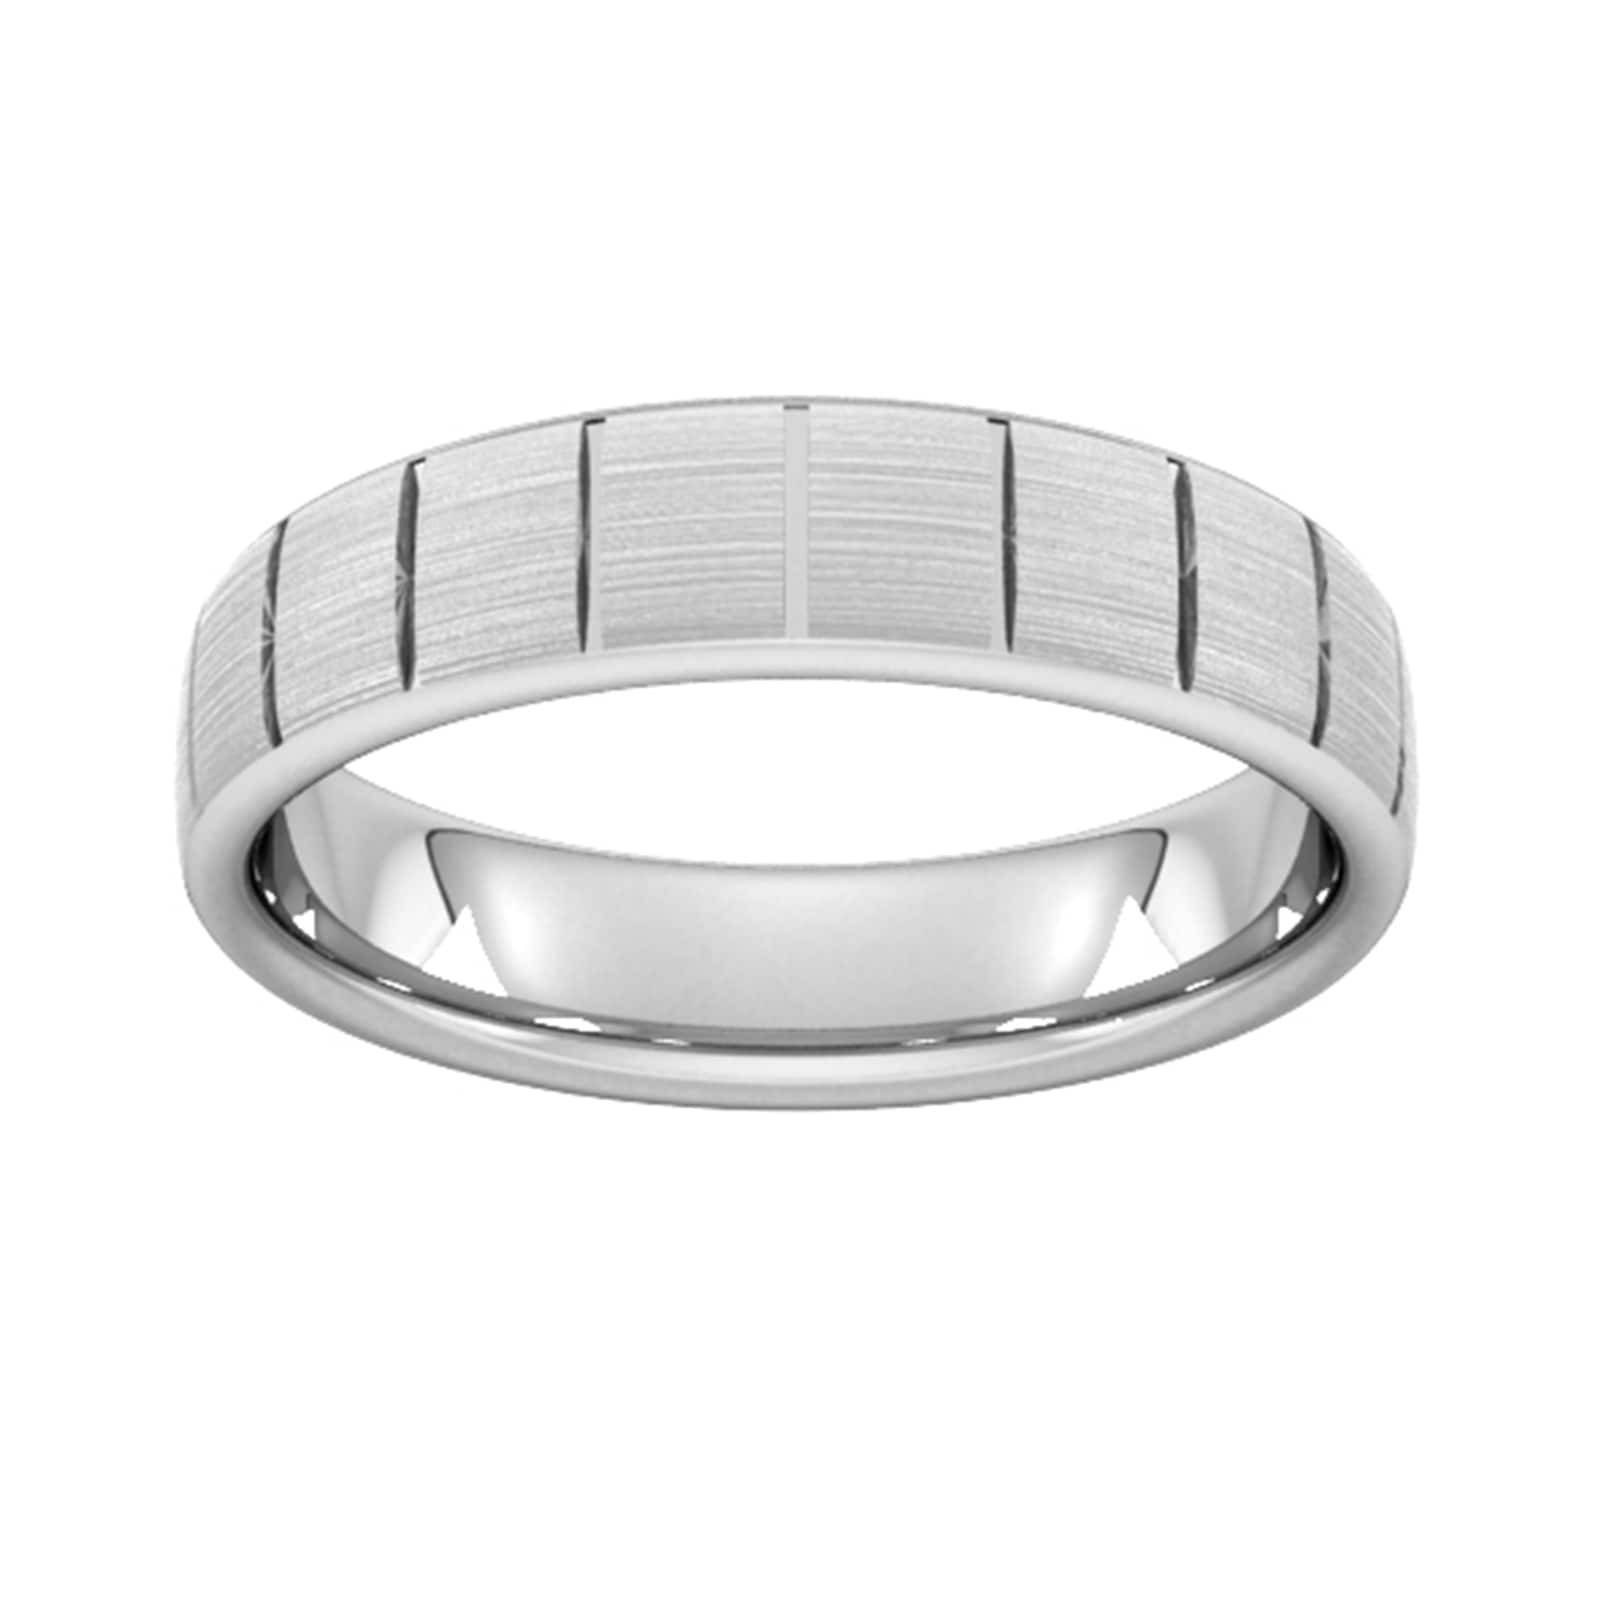 4mm D Shape Heavy Vertical Lines Wedding Ring In 18 Carat White Gold - Ring Size O